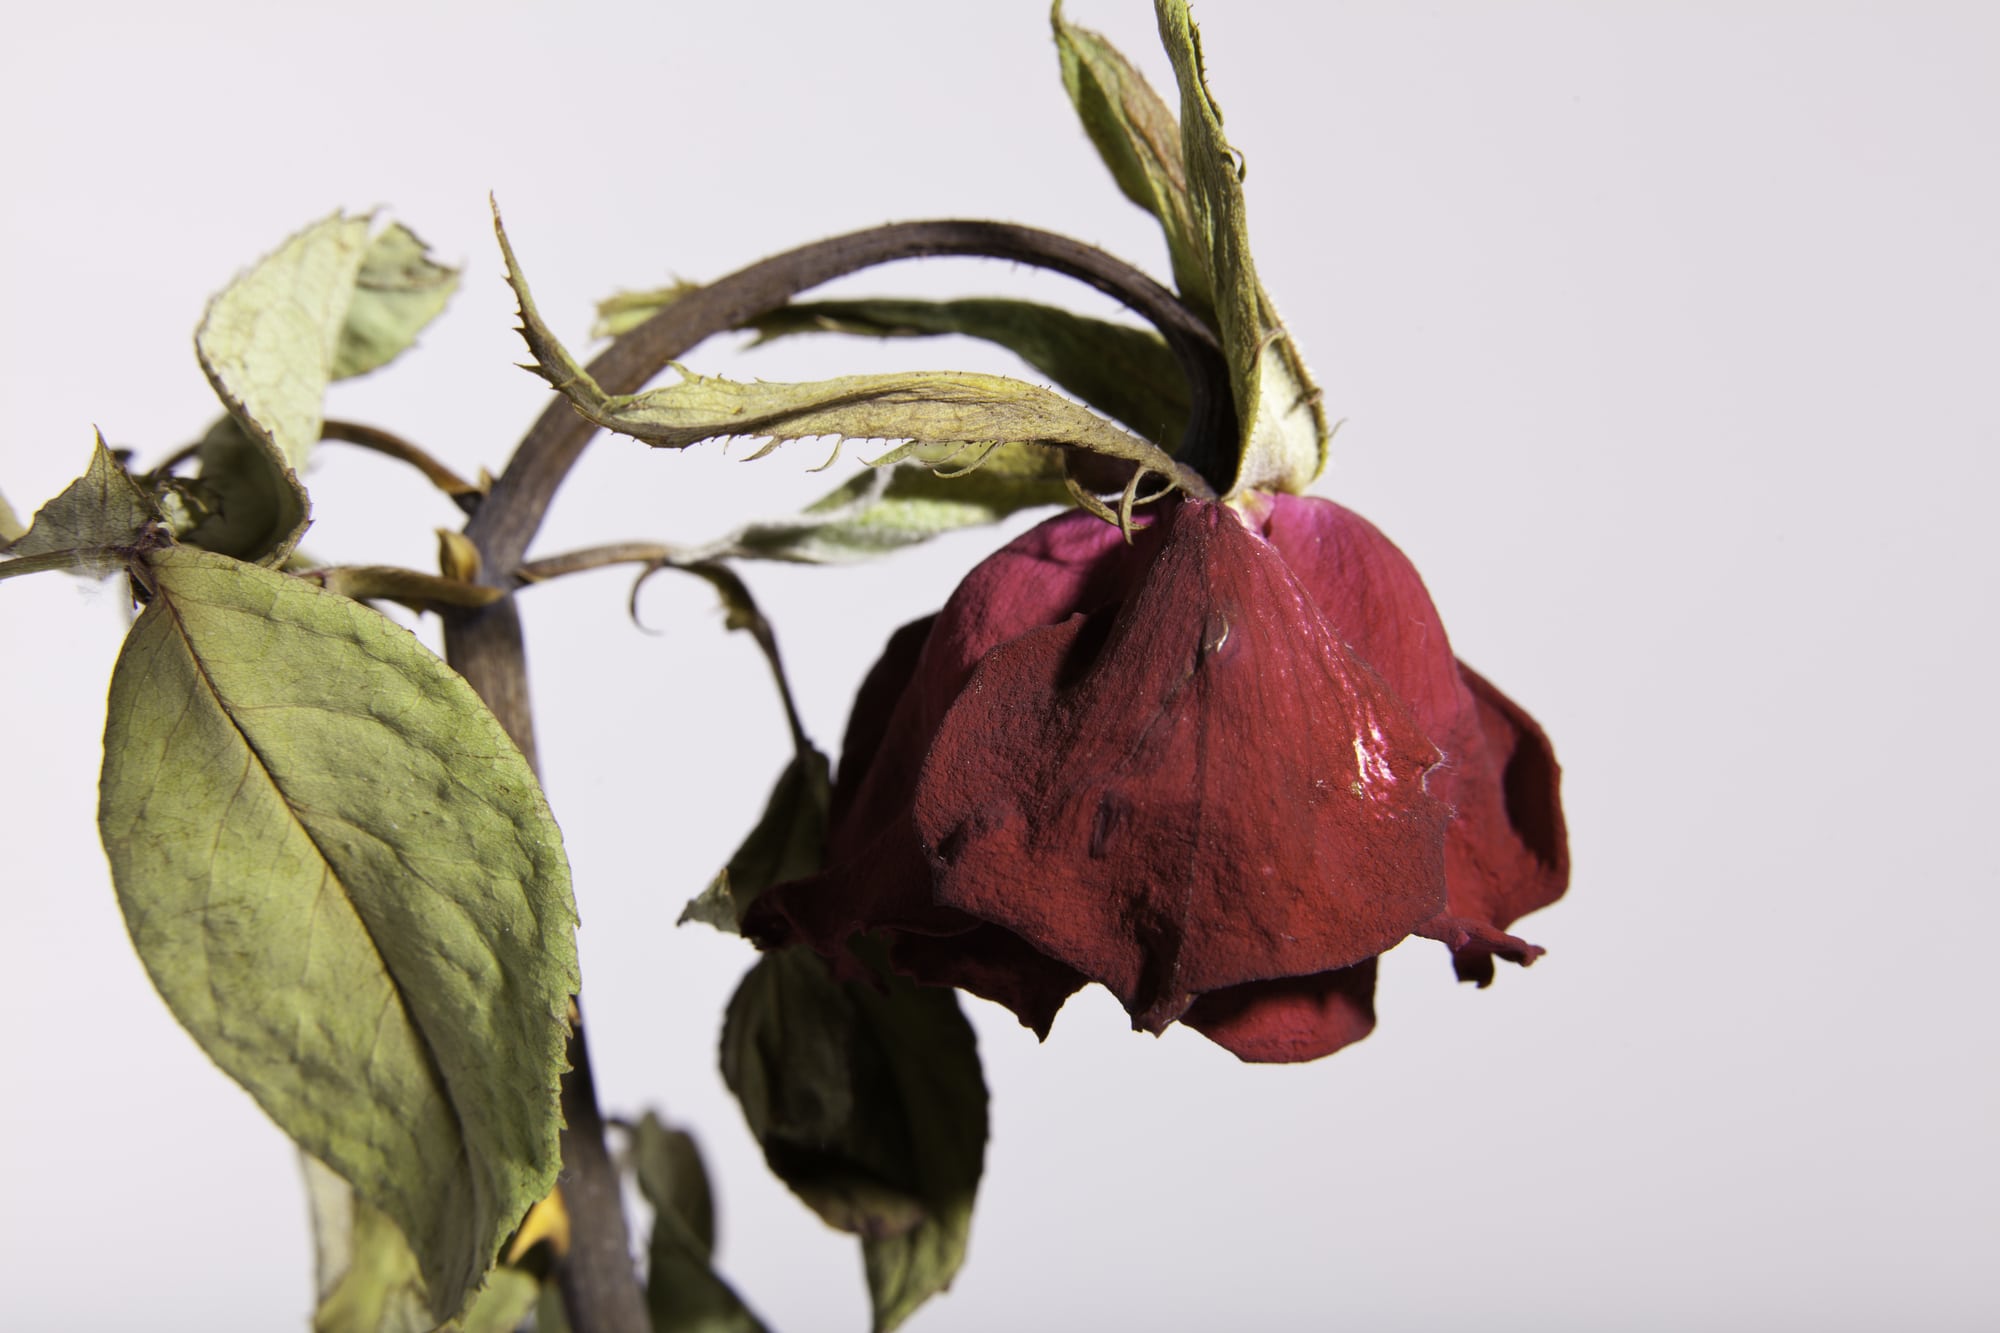 A wilted red rose bent over